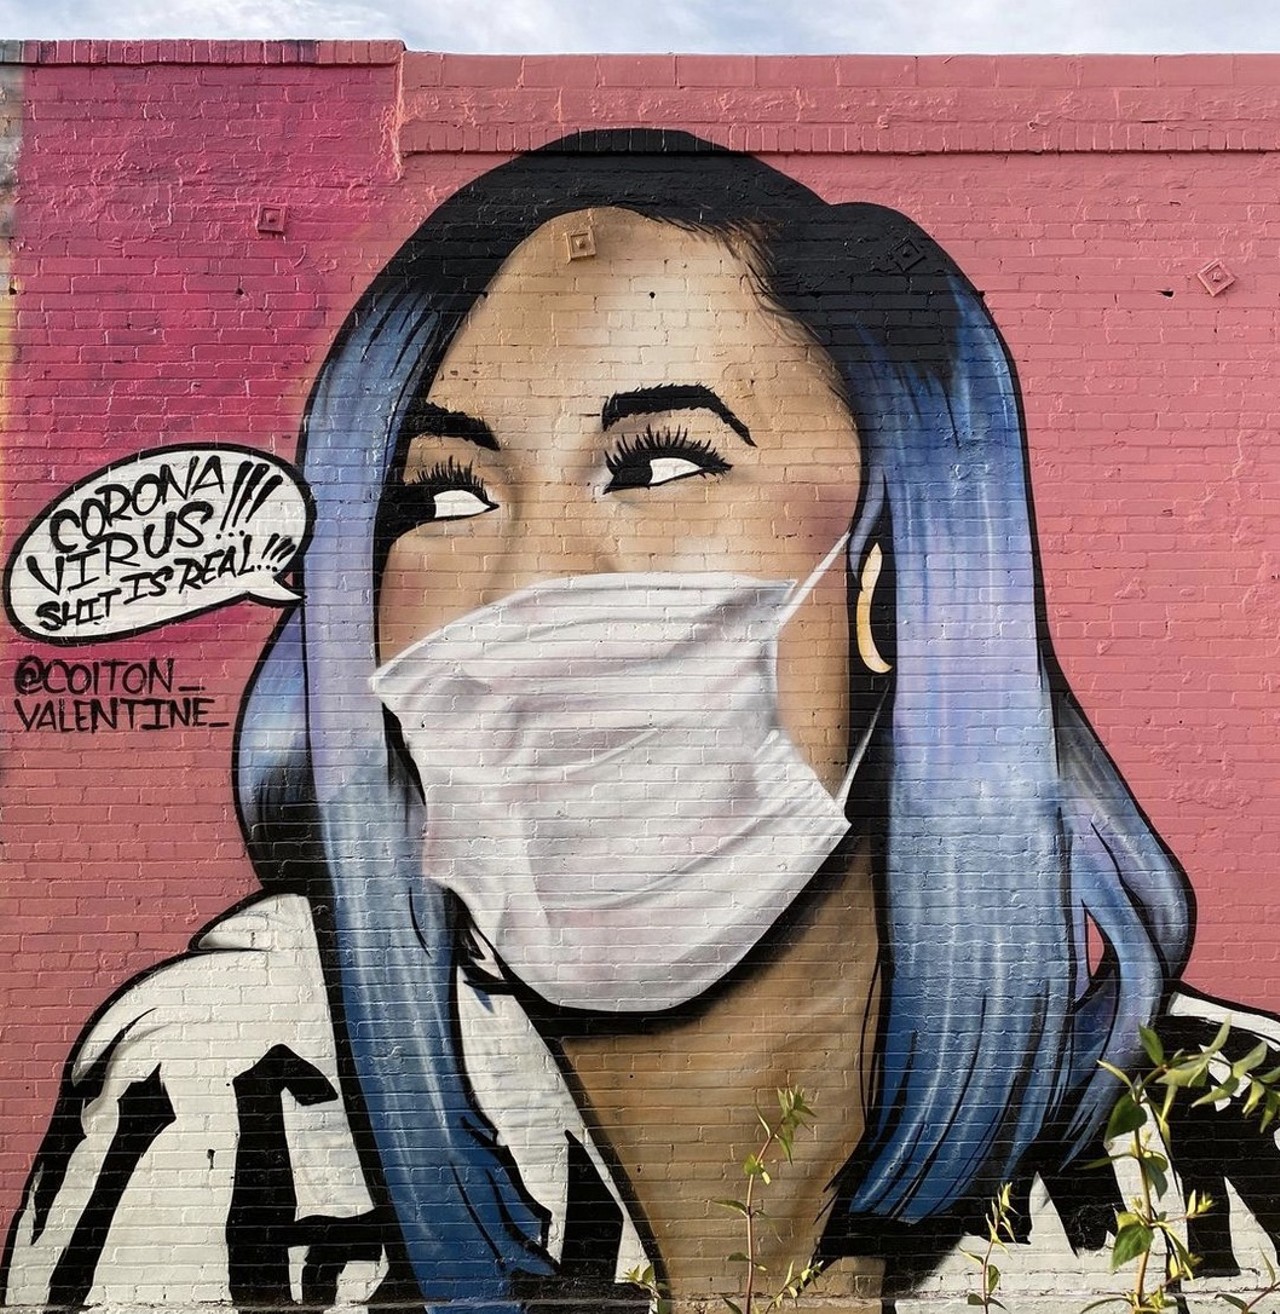 @colton_valentine_
Colton Valentine’s iconic Cardi B mural got a 2020-appropriate update that was approved by the rapper herself. 
Photo via Instagram / colton_valentine_